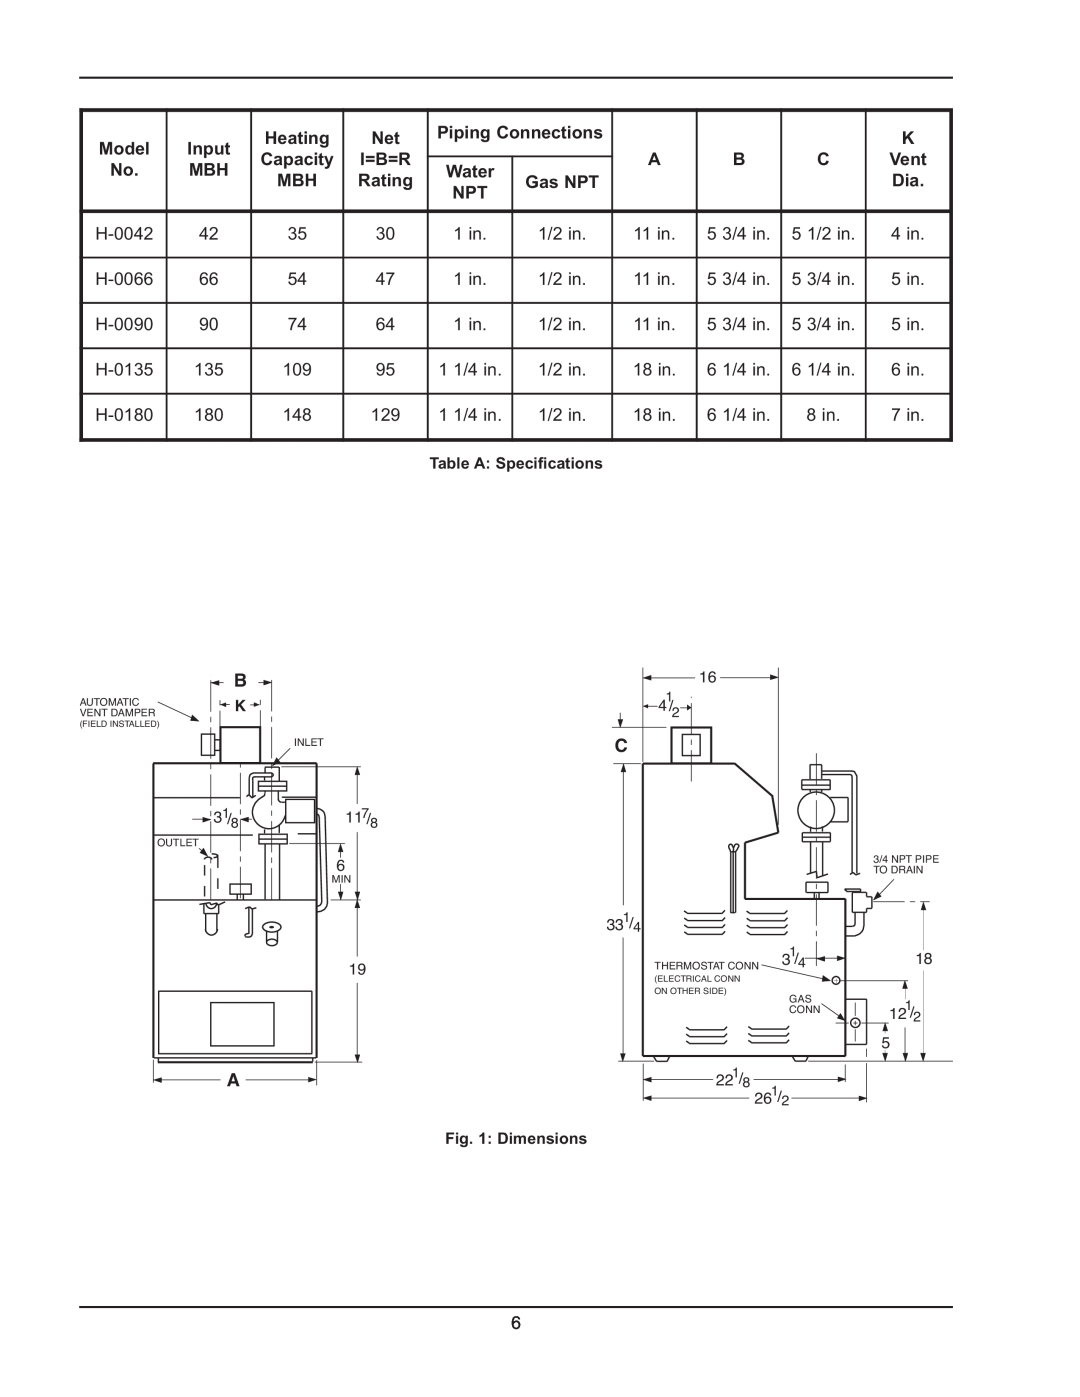 Raypak 0180B Type H manual Heating, Piping Connections, Input, Capacity, I=B=R, Rating, Gas NPT 